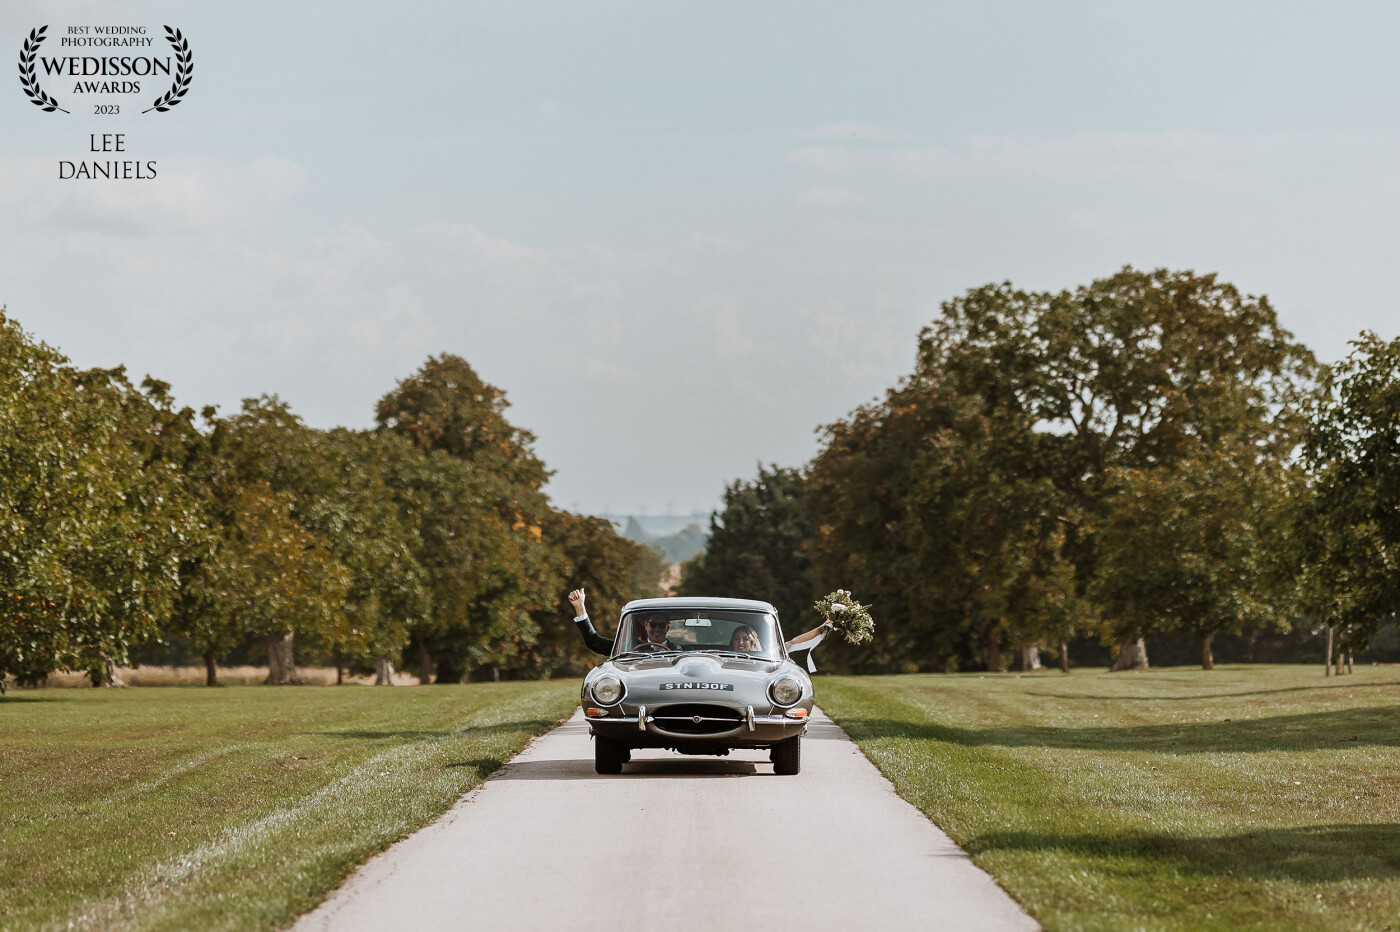 When you hire a car like this, you best believe we'll be taking it for a spin. Ricky & Danielle giving off all the 007 vibes at Bassmead Manor Barns